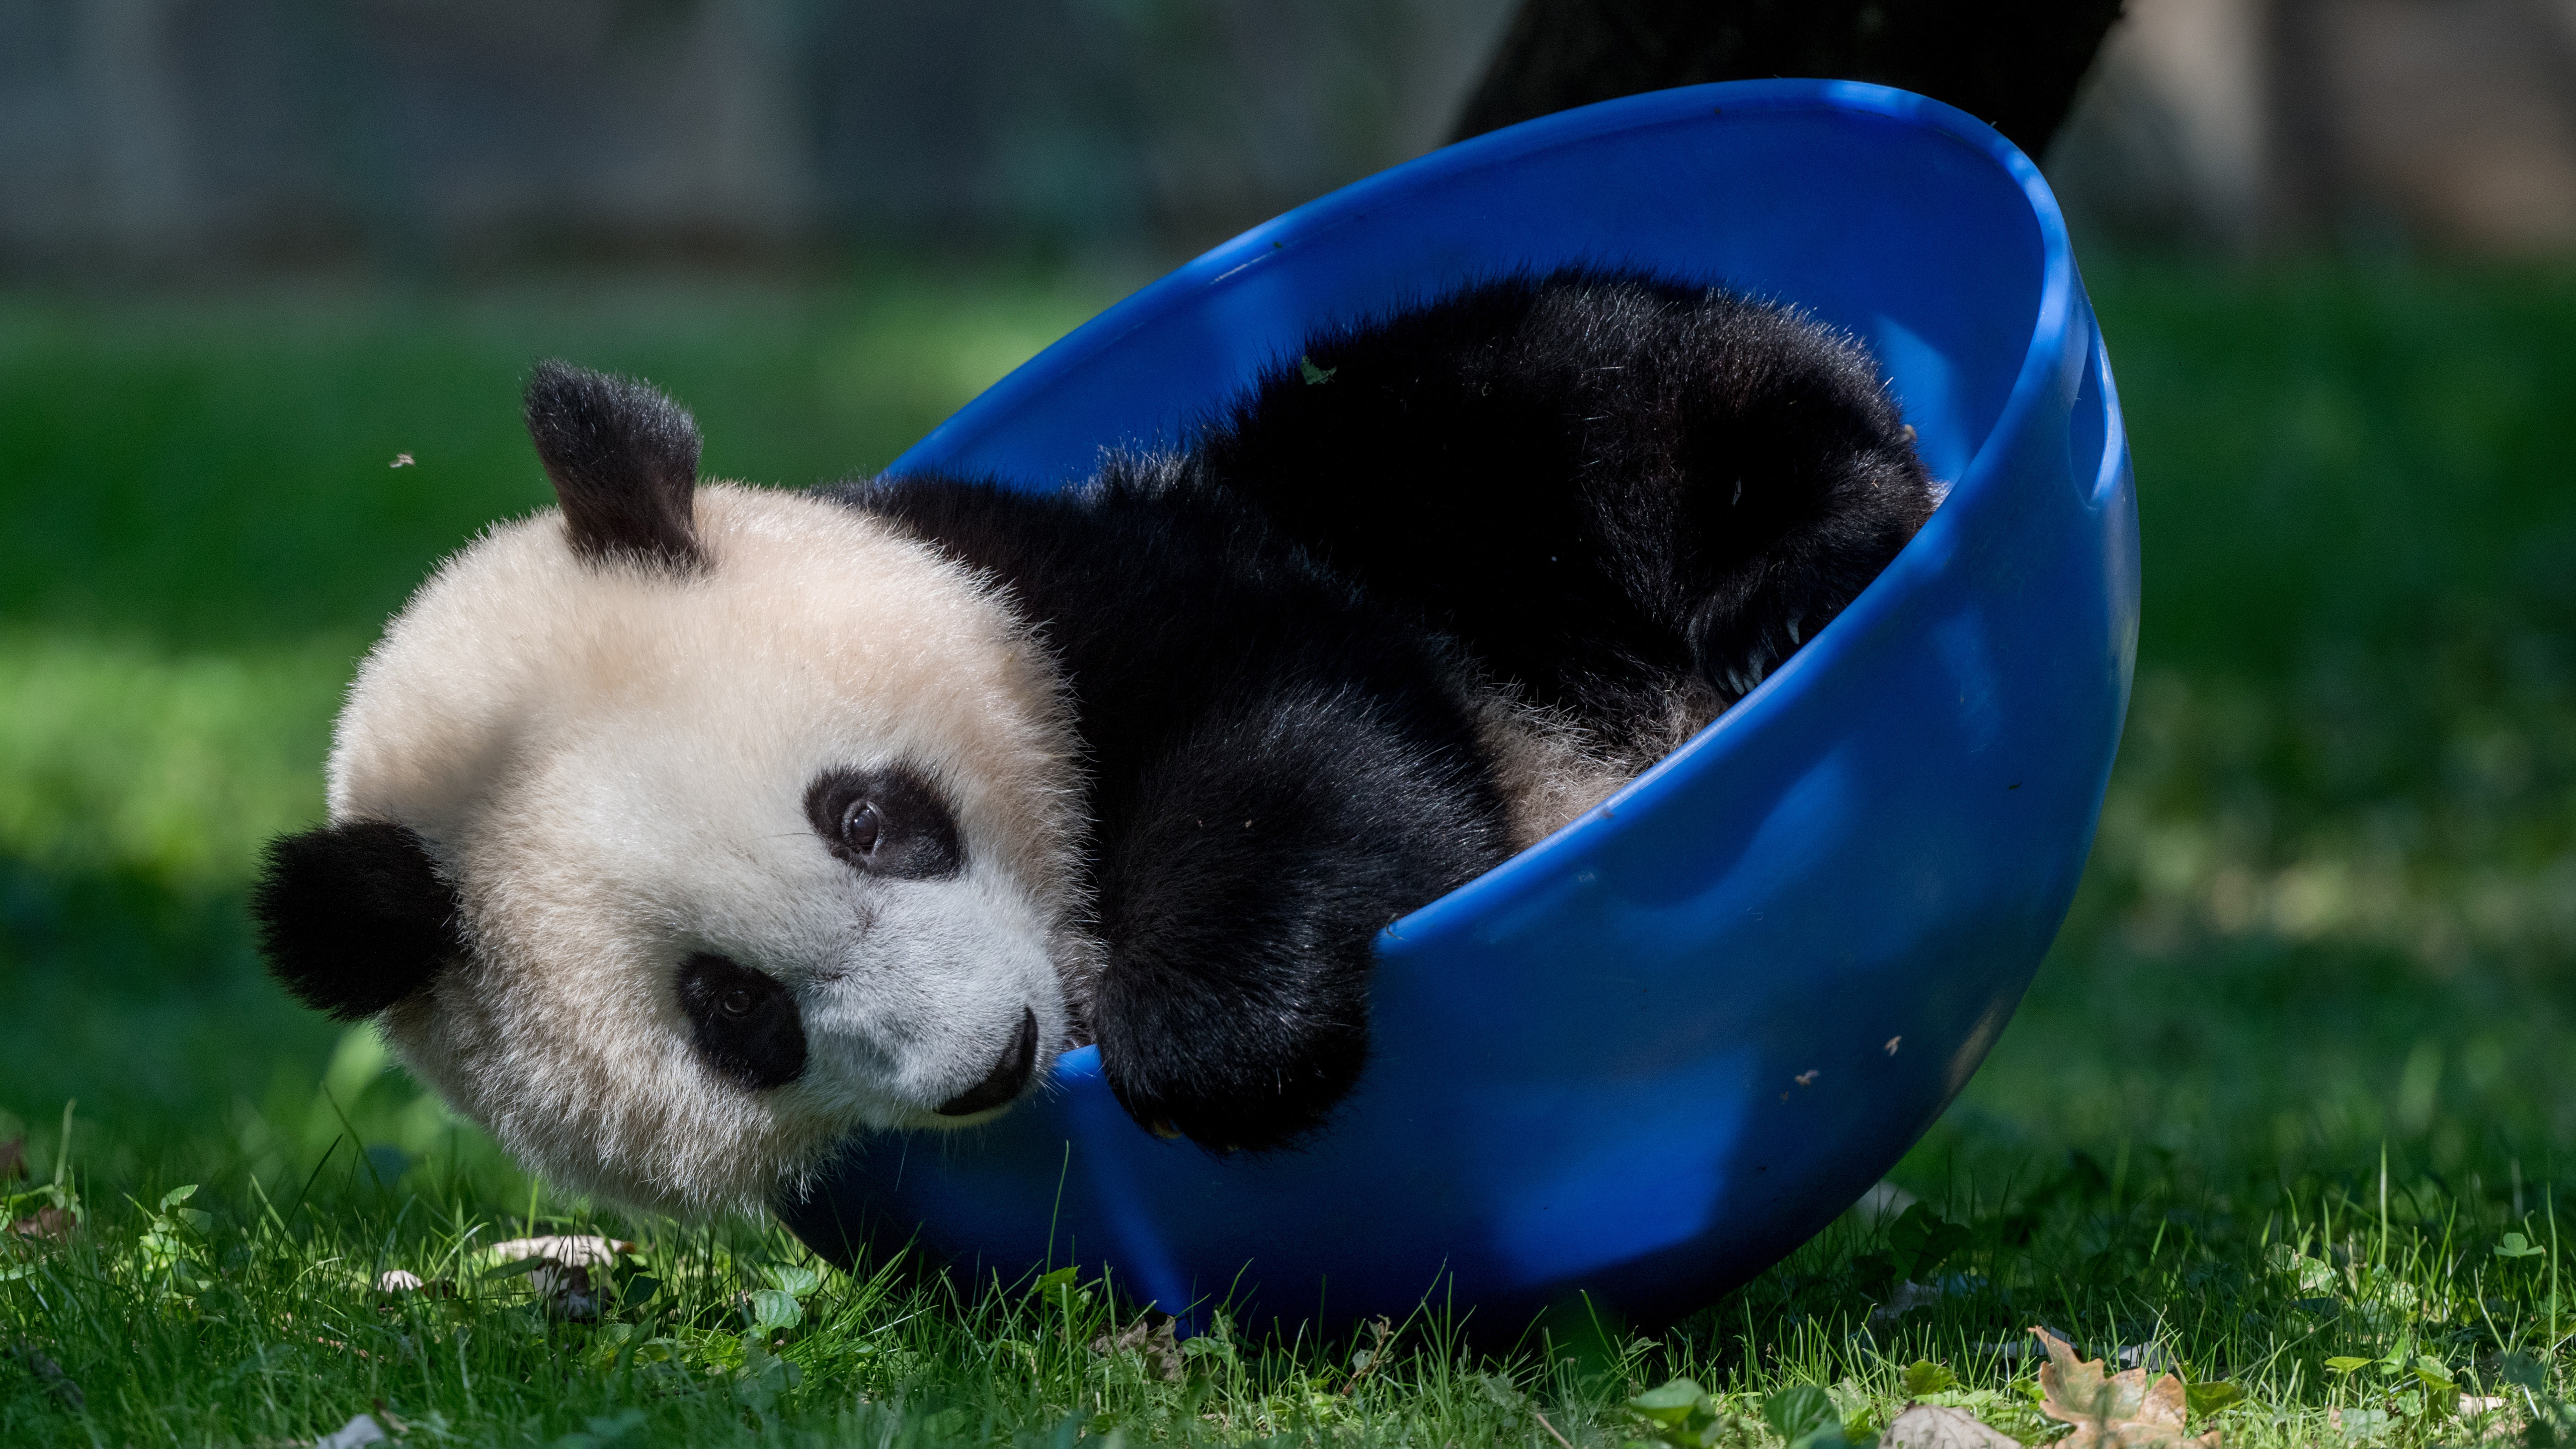 Free photo A mischievous panda cub playing with a blue basin